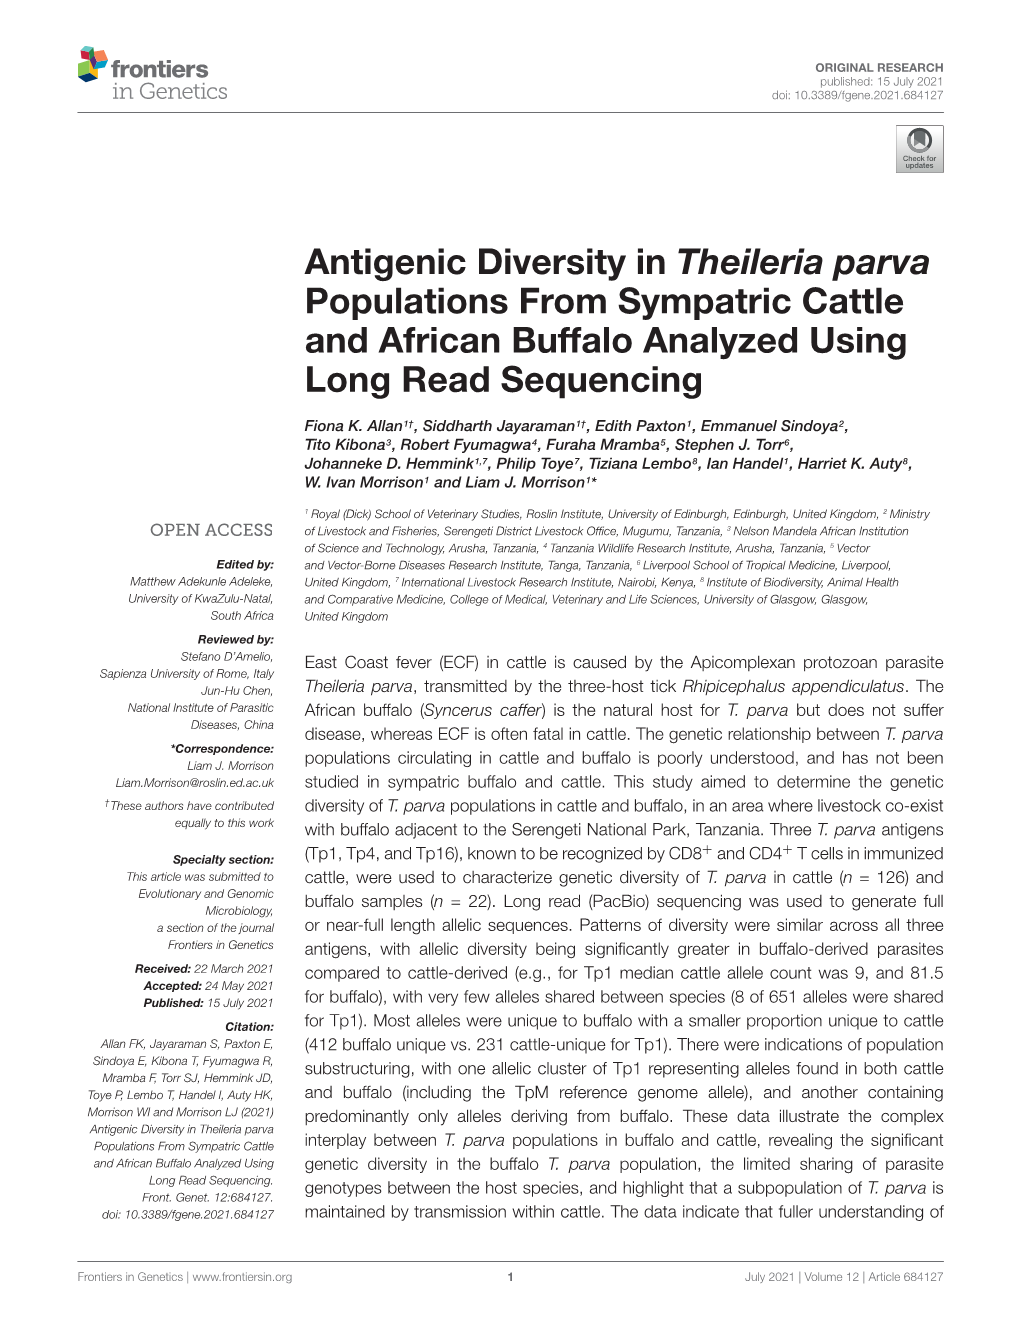 Antigenic Diversity in Theileria Parva Populations from Sympatric Cattle and African Buffalo Analyzed Using Long Read Sequencing